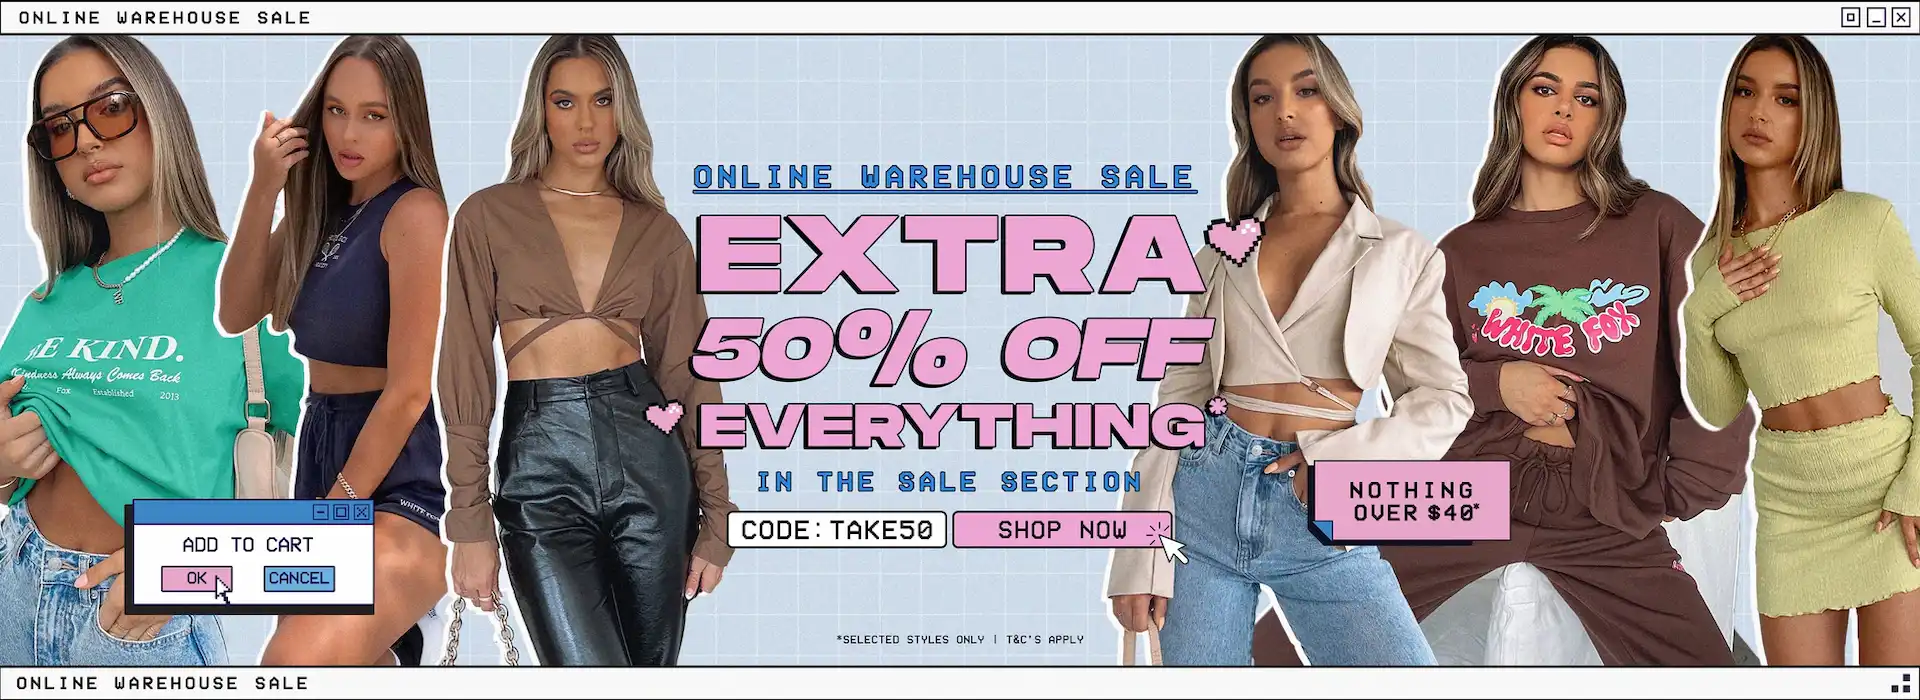 White Fox Boutique extra 50% OFF on everything in sale section with promo code